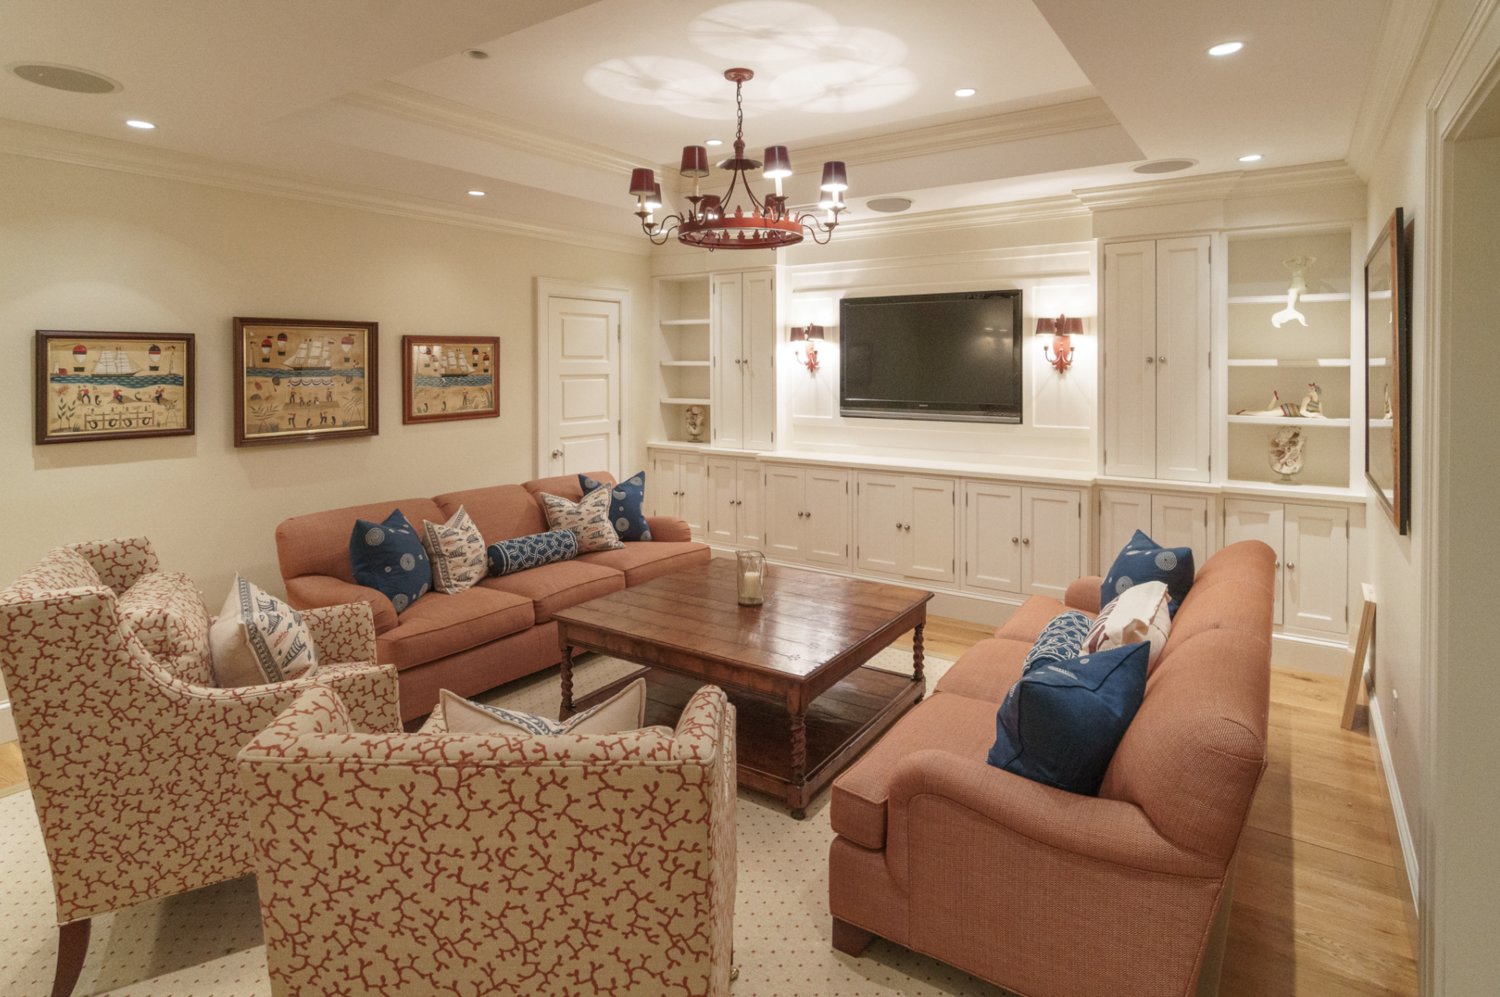 The lower level of the home has a game room, exercise room and custom wine room.